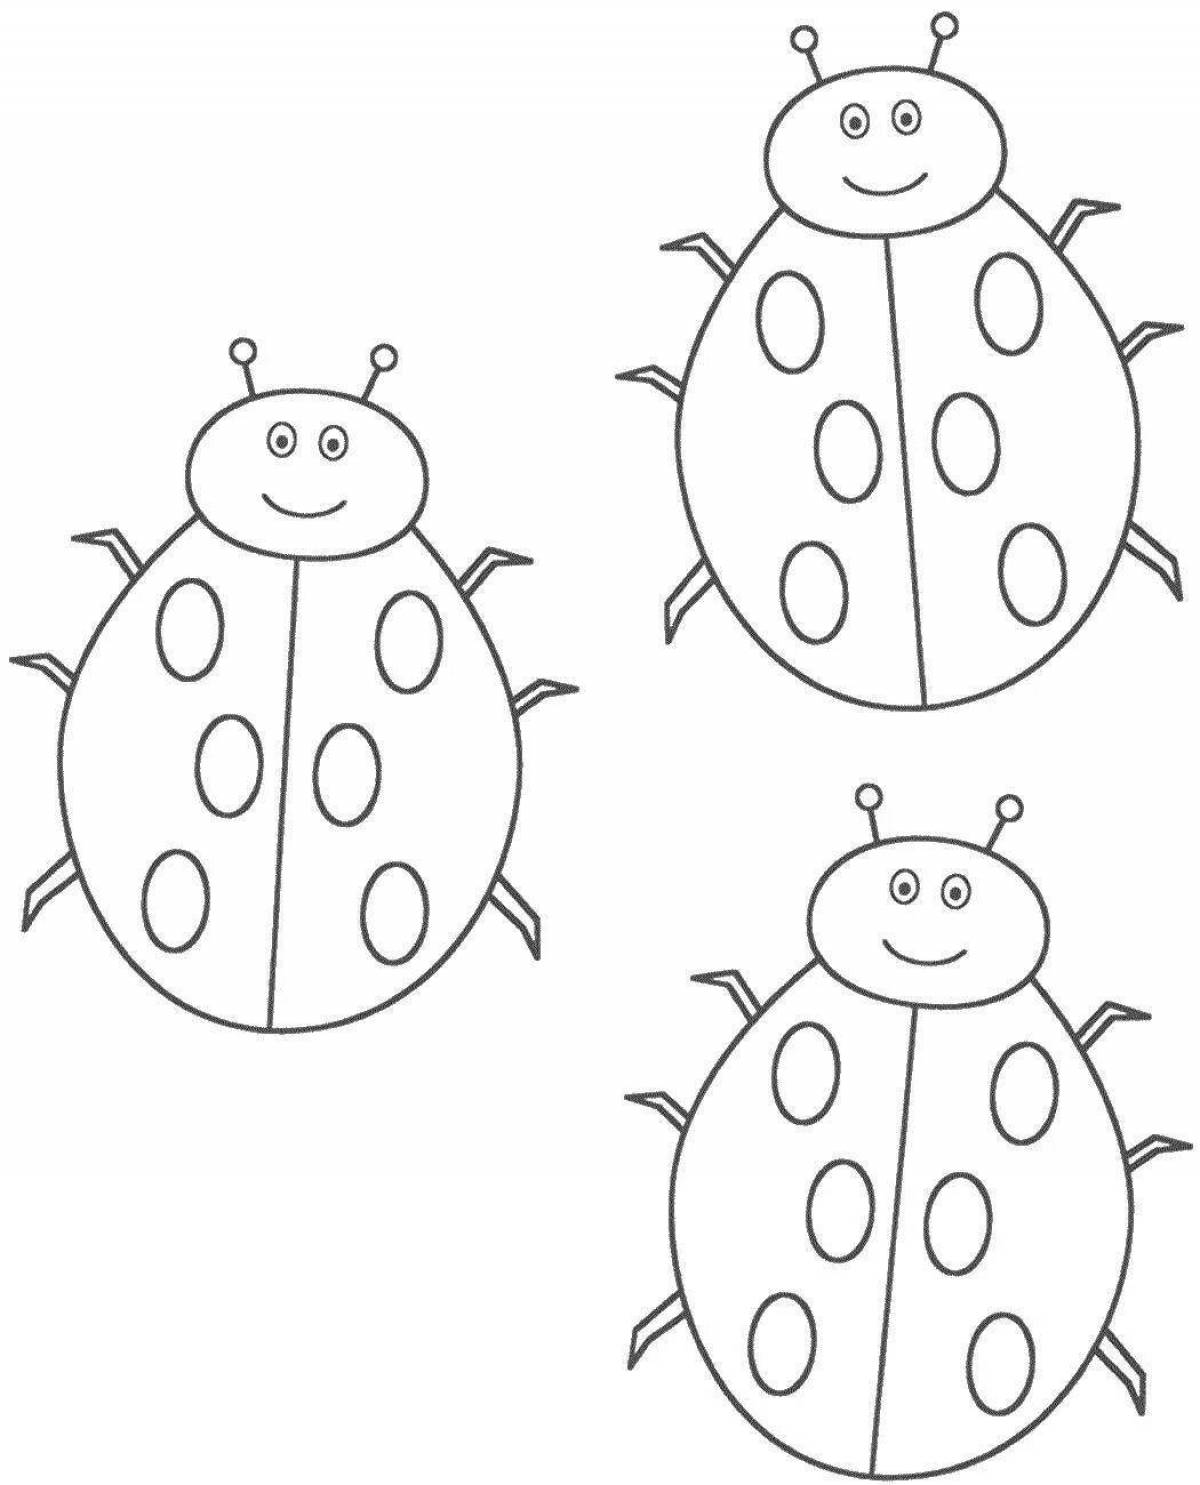 An attractive ladybug coloring book for kids